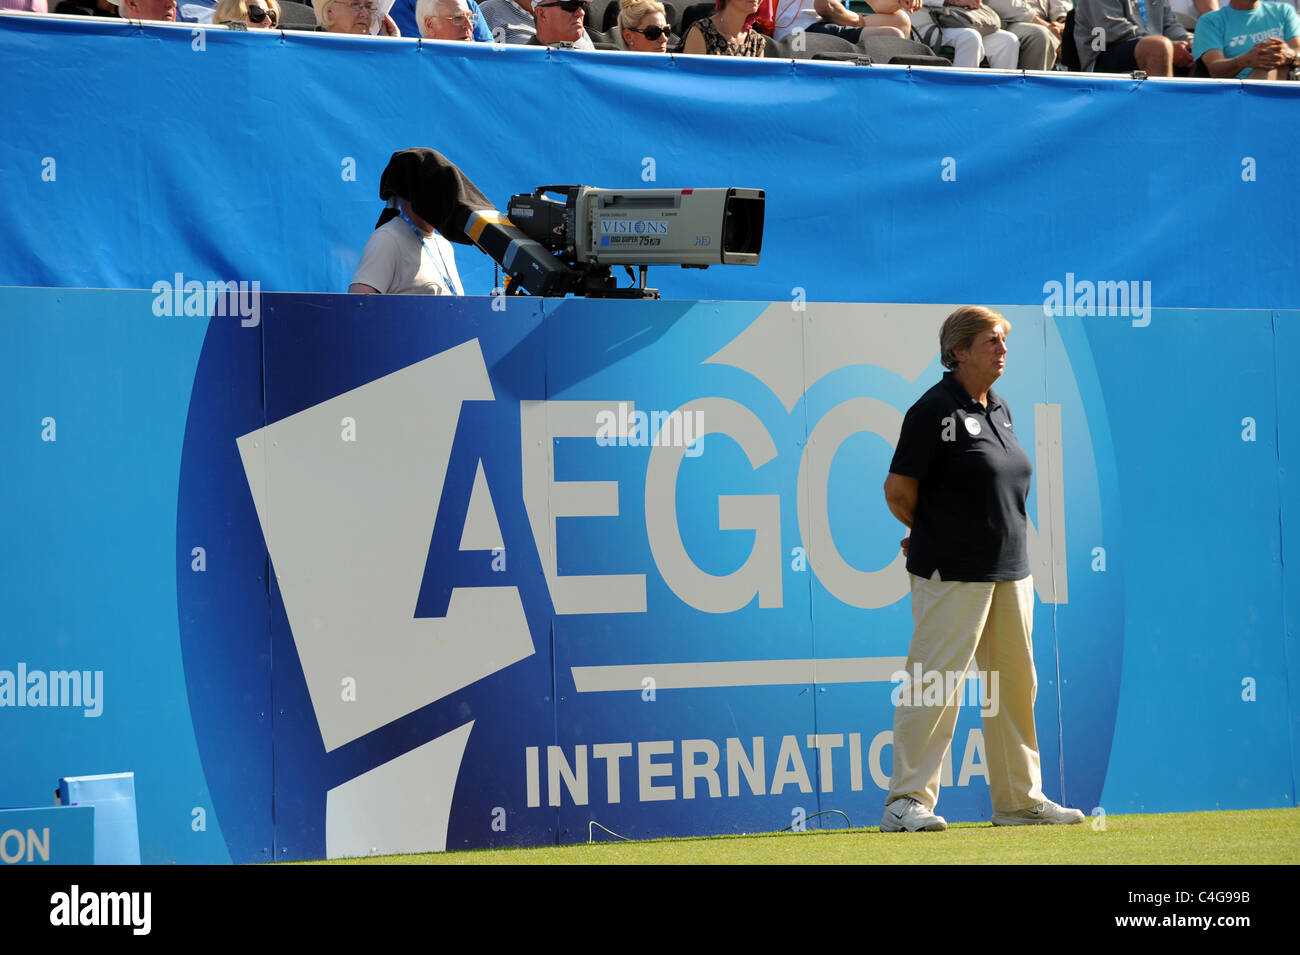 An outside broadcast television cameraman working at the Aegon International tennis in Eastbourne UK Stock Photo